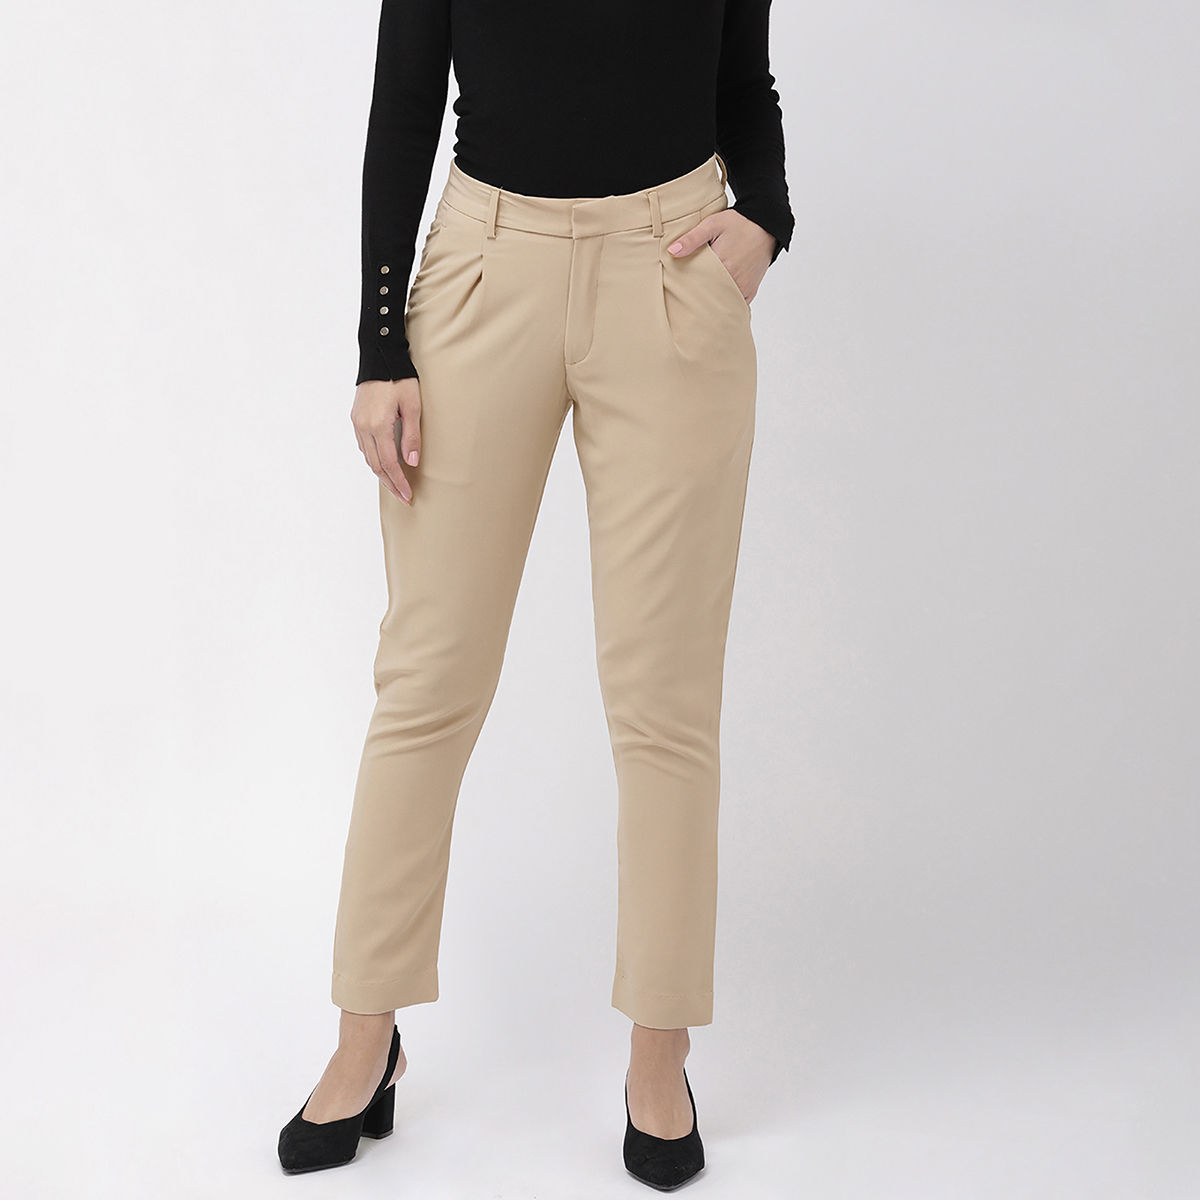 GO COLORS Relaxed Women White Trousers  Buy GO COLORS Relaxed Women White  Trousers Online at Best Prices in India  Flipkartcom